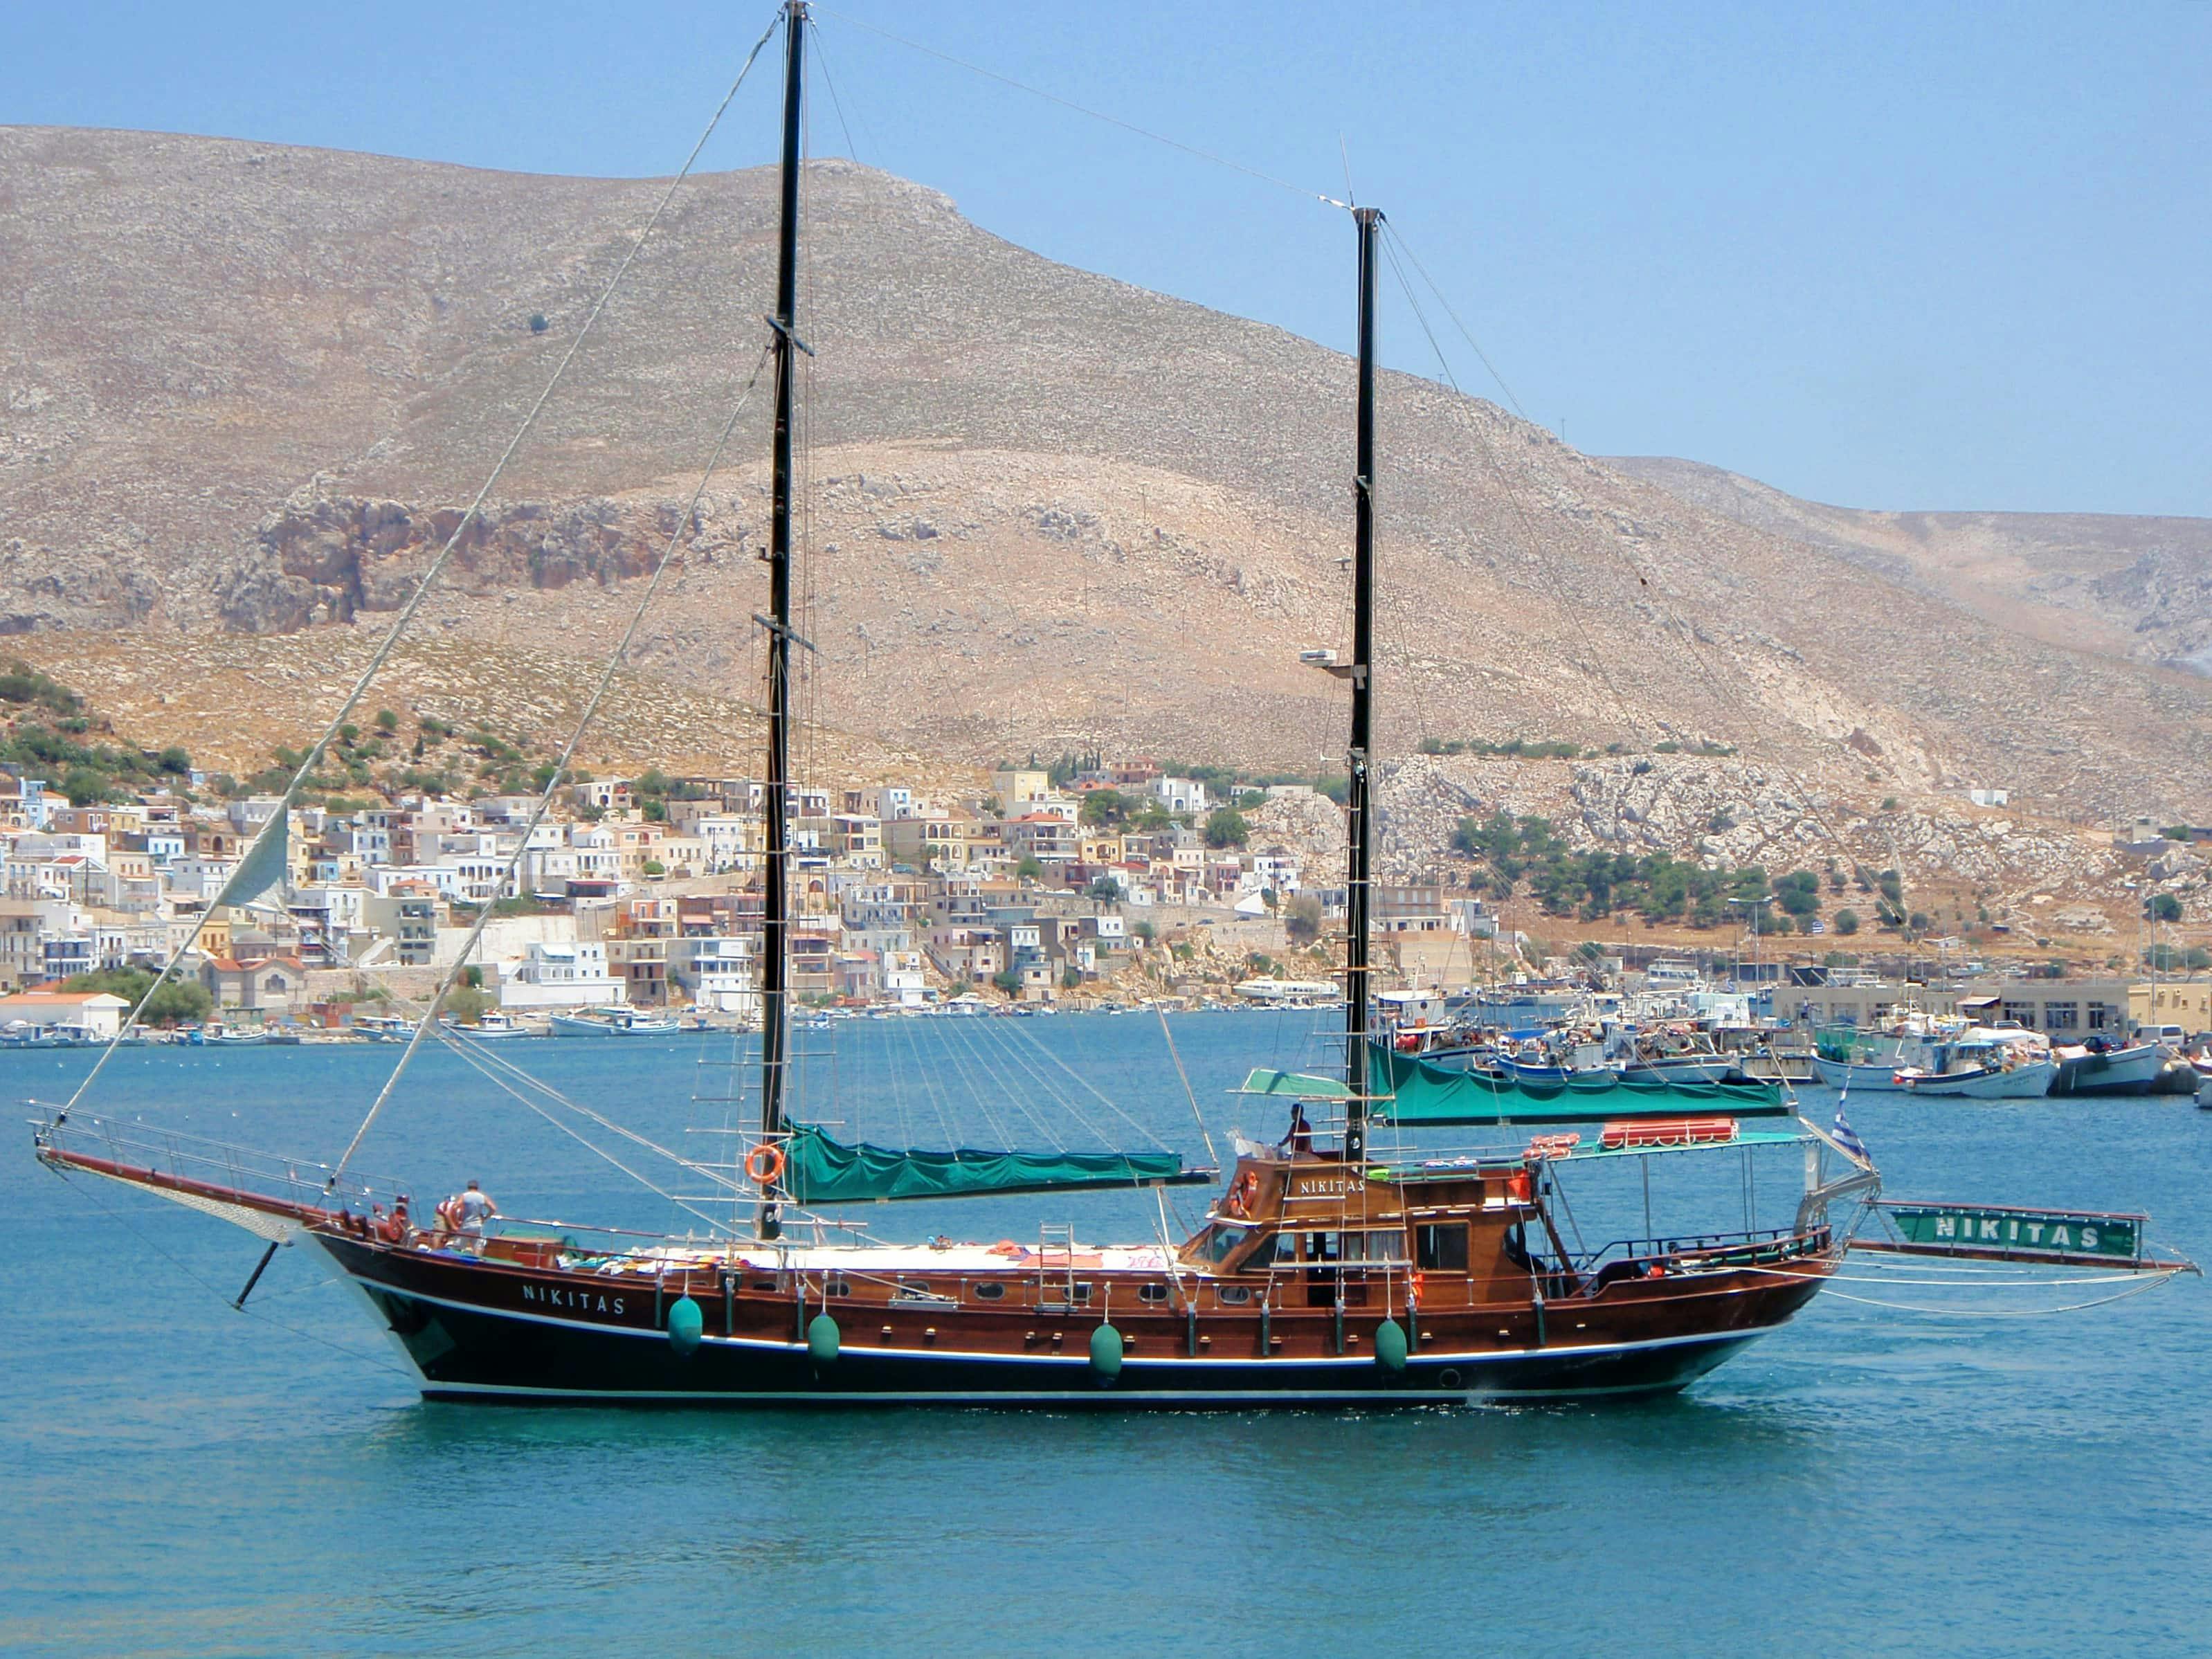 Adults-only Cruise in the Aegean